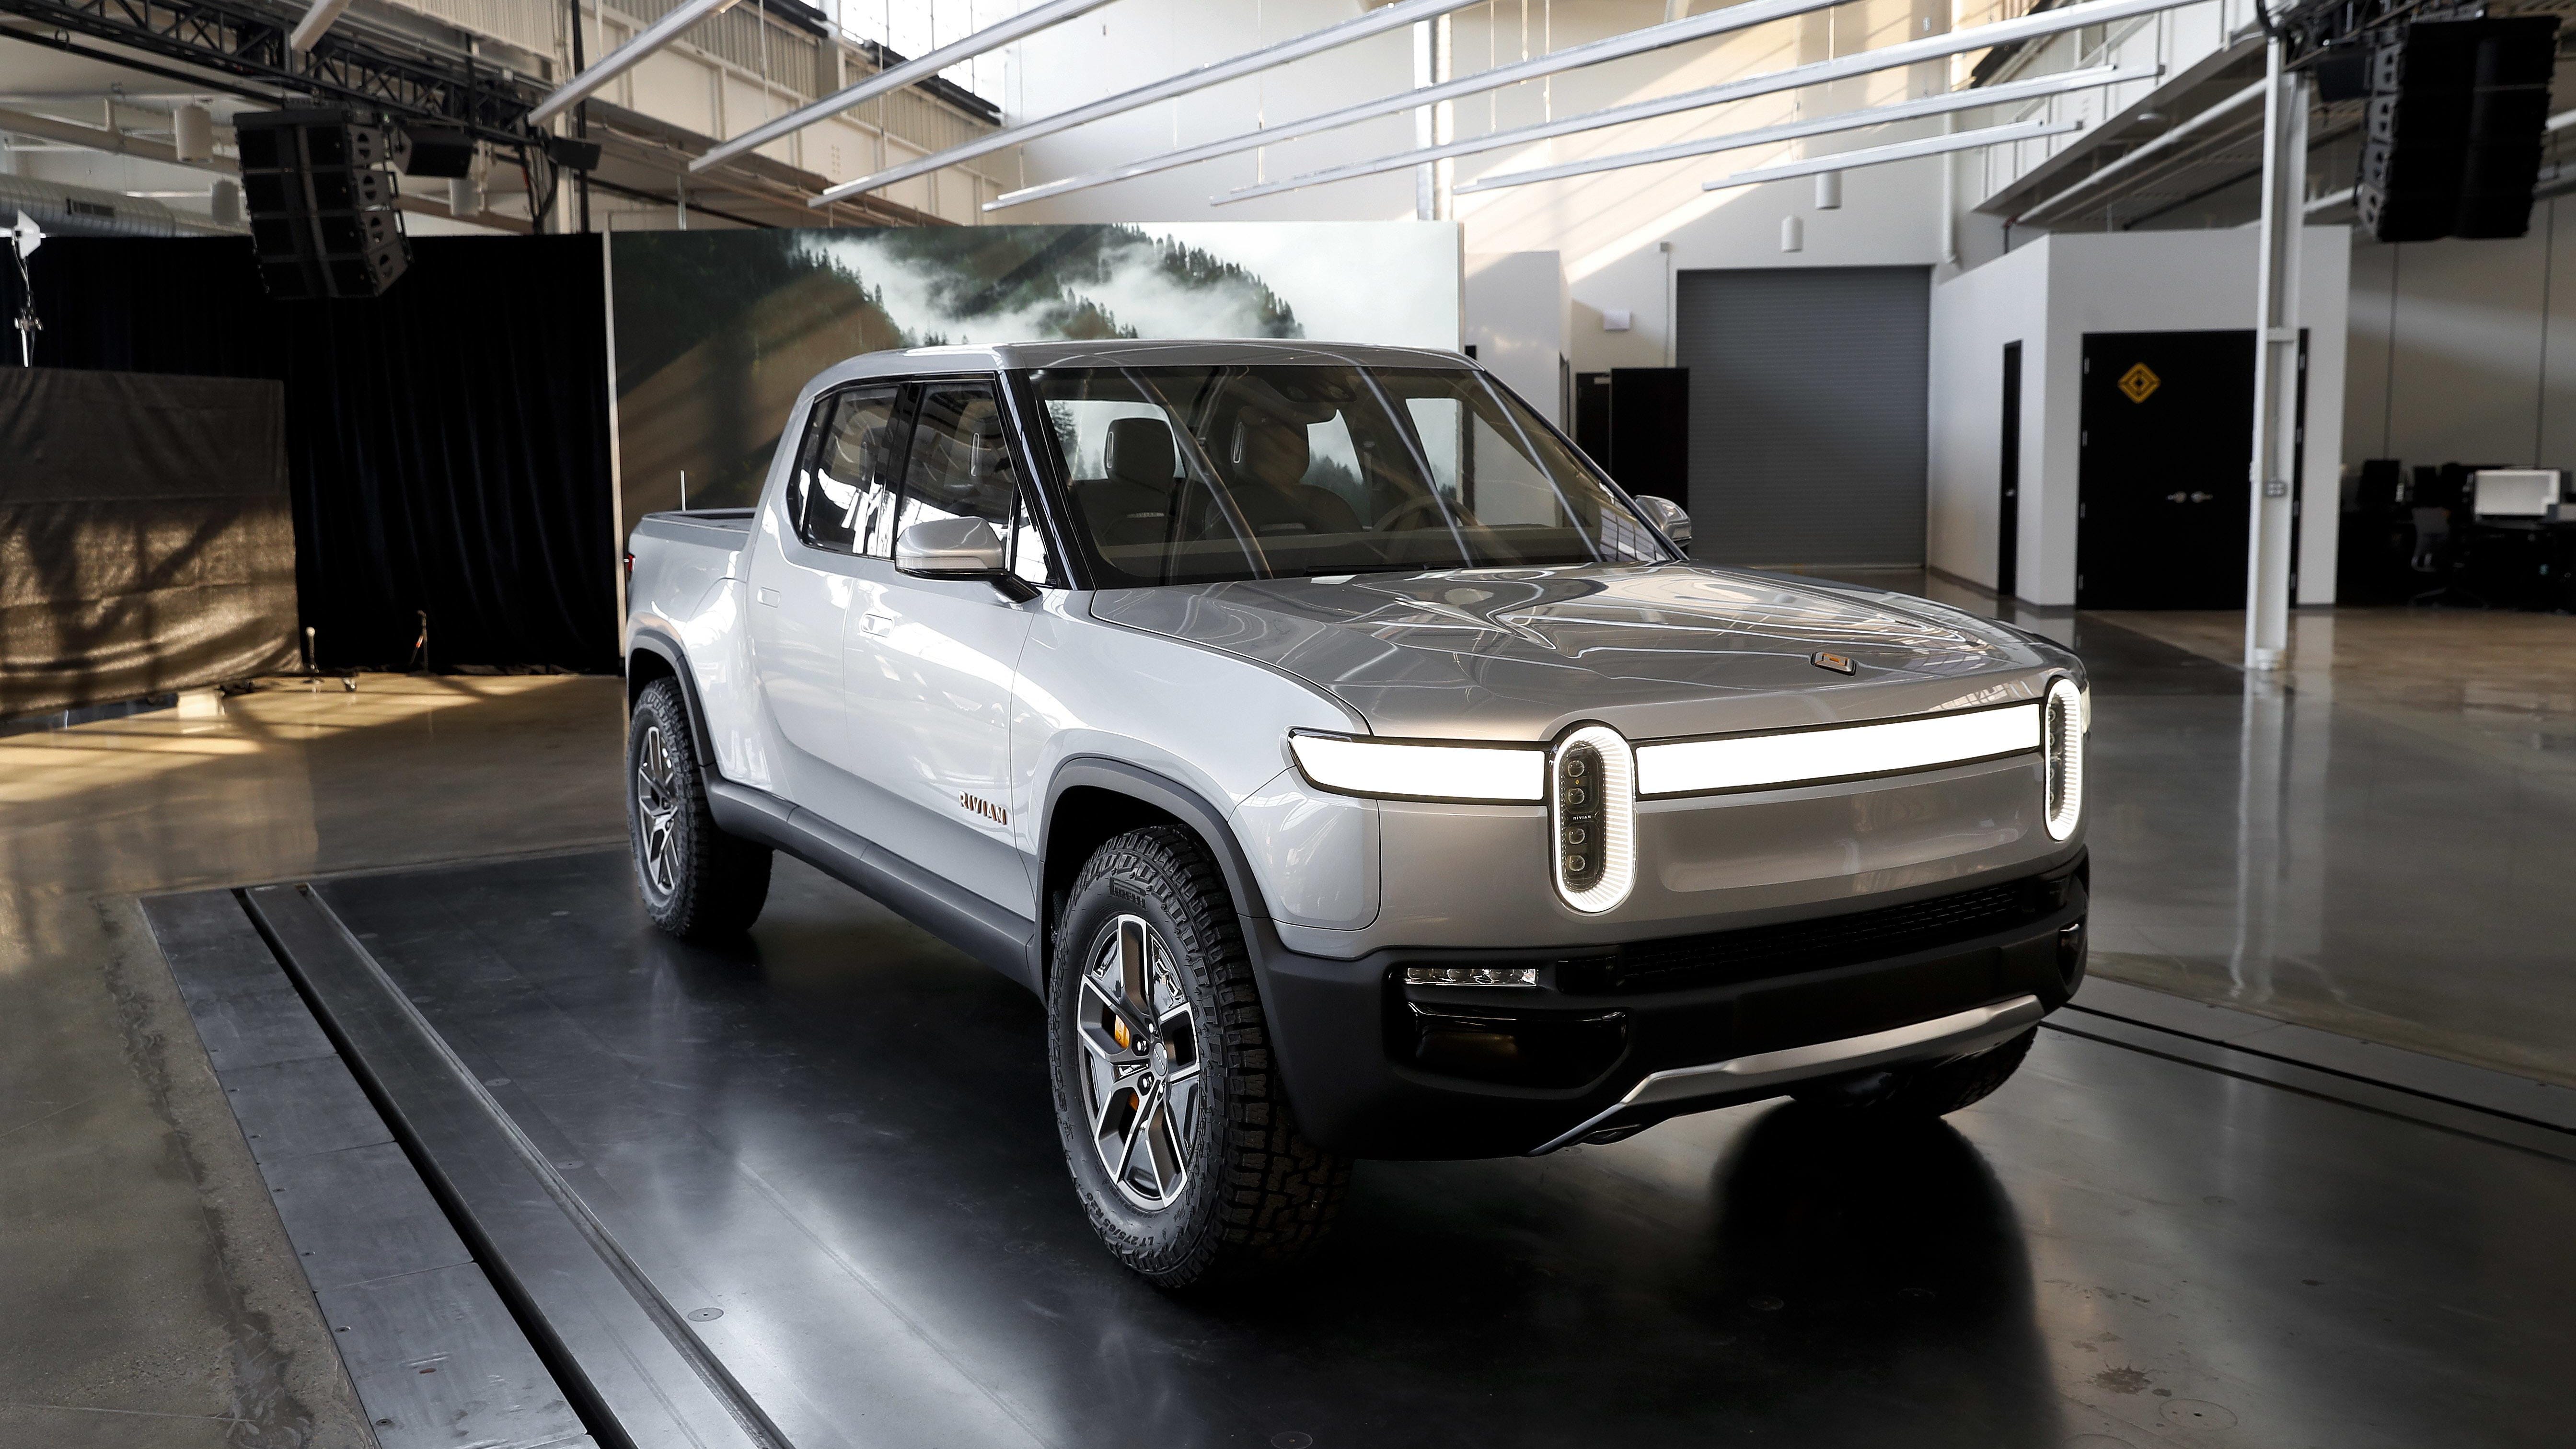 An R1T is displayed at Rivian’s headquarters. GM was widely expected to become a strategic investor that would have helped the Michigan startup bring fully electric trucks and SUVs to market faster.